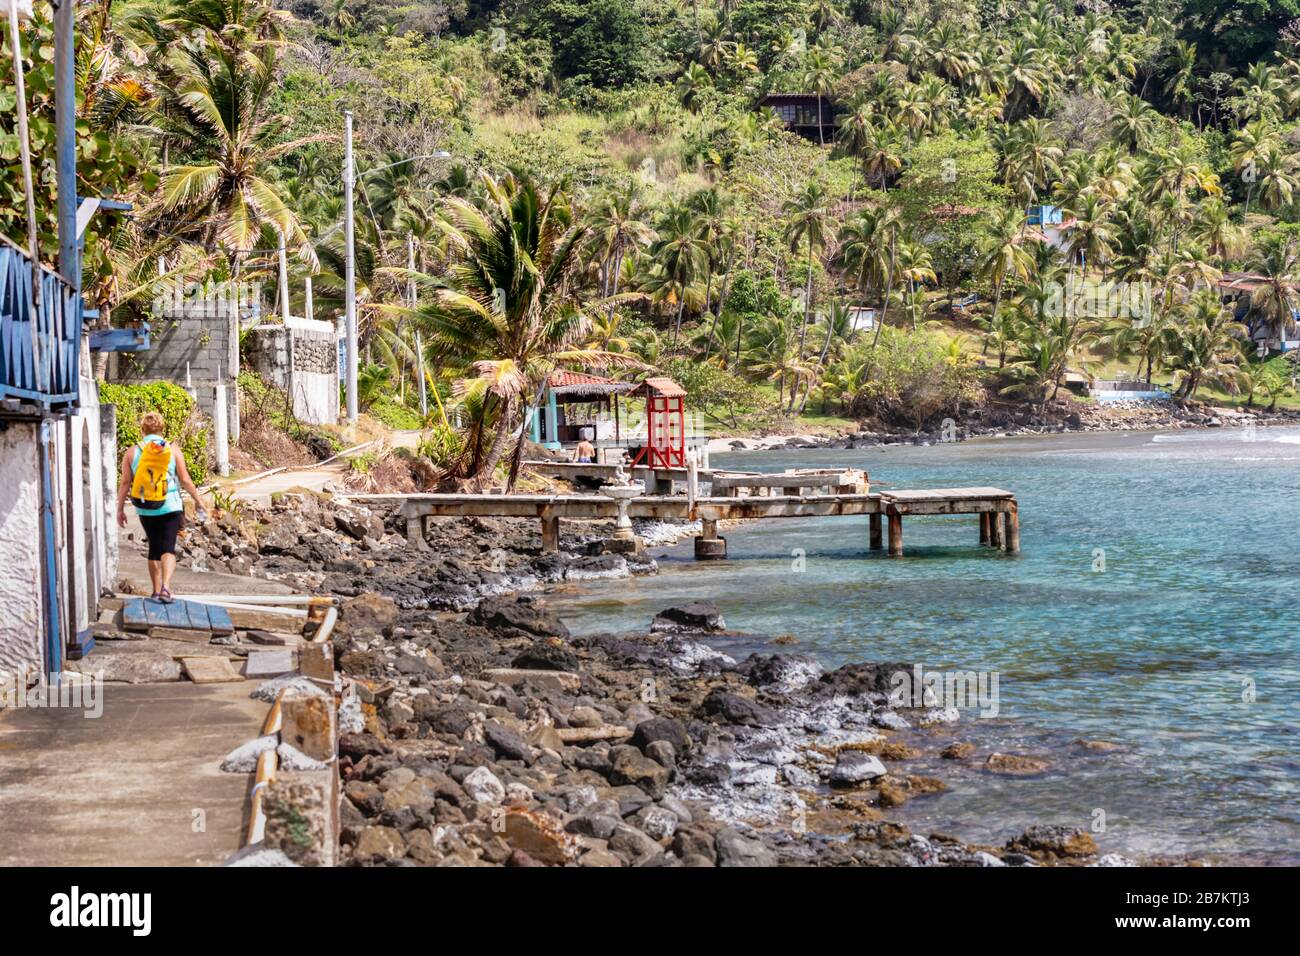 View at Palm trees, sea and houses in Isla Grande shore. Colon province, Panama, Caribbean, Central America. Stock Photo